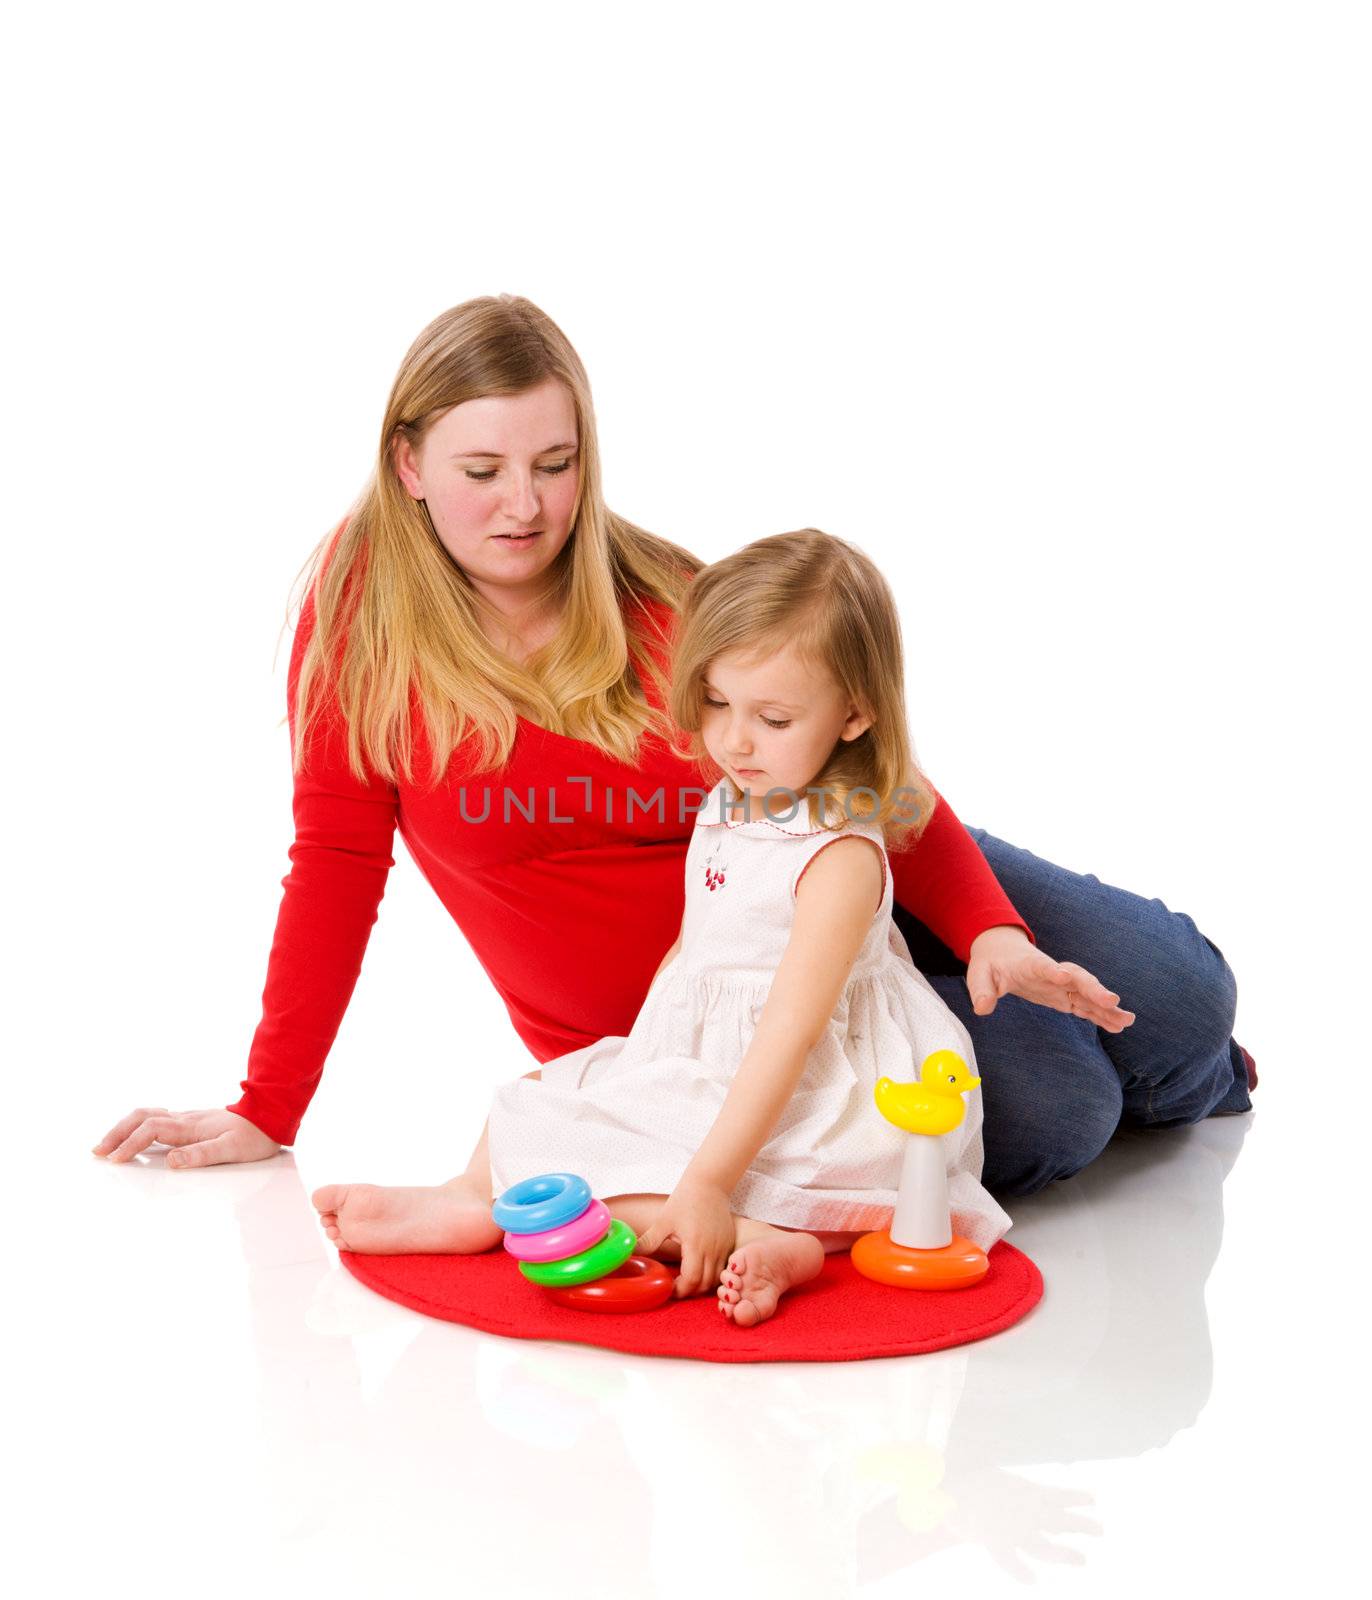 mother and daughter playing together isolated on white